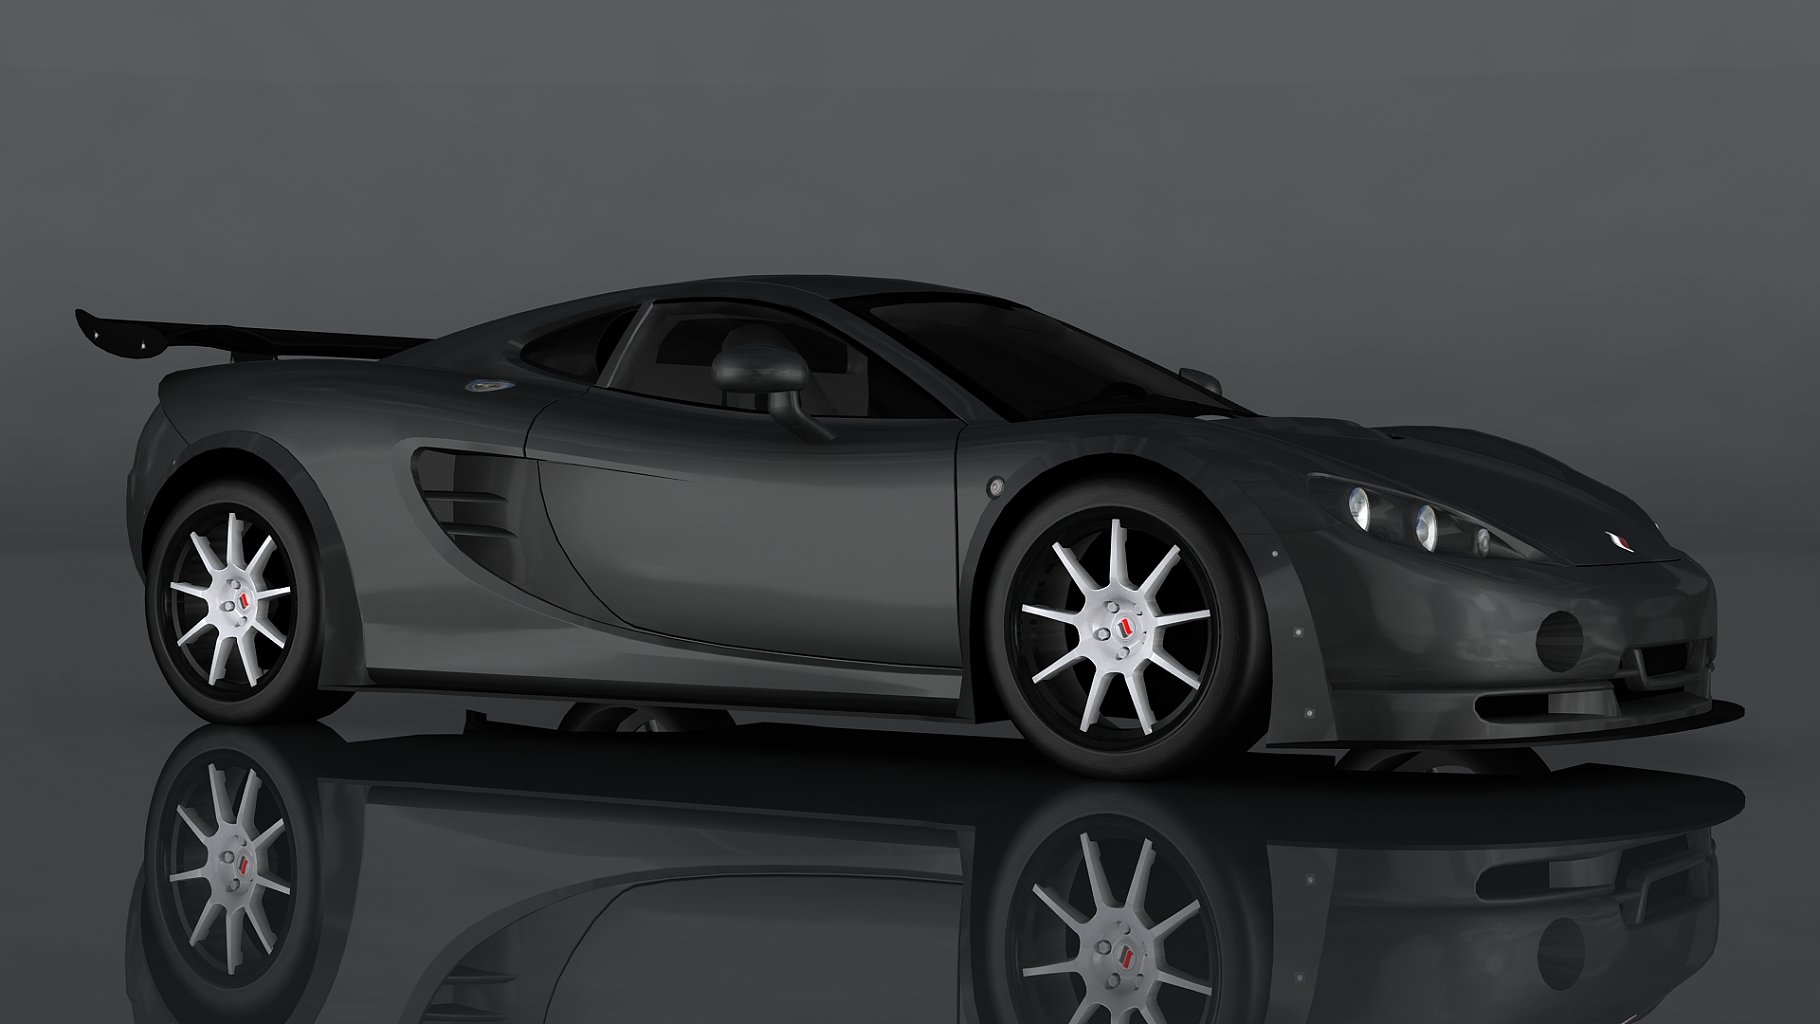 Front right mockup of ascari kz1r low poly 3d model.